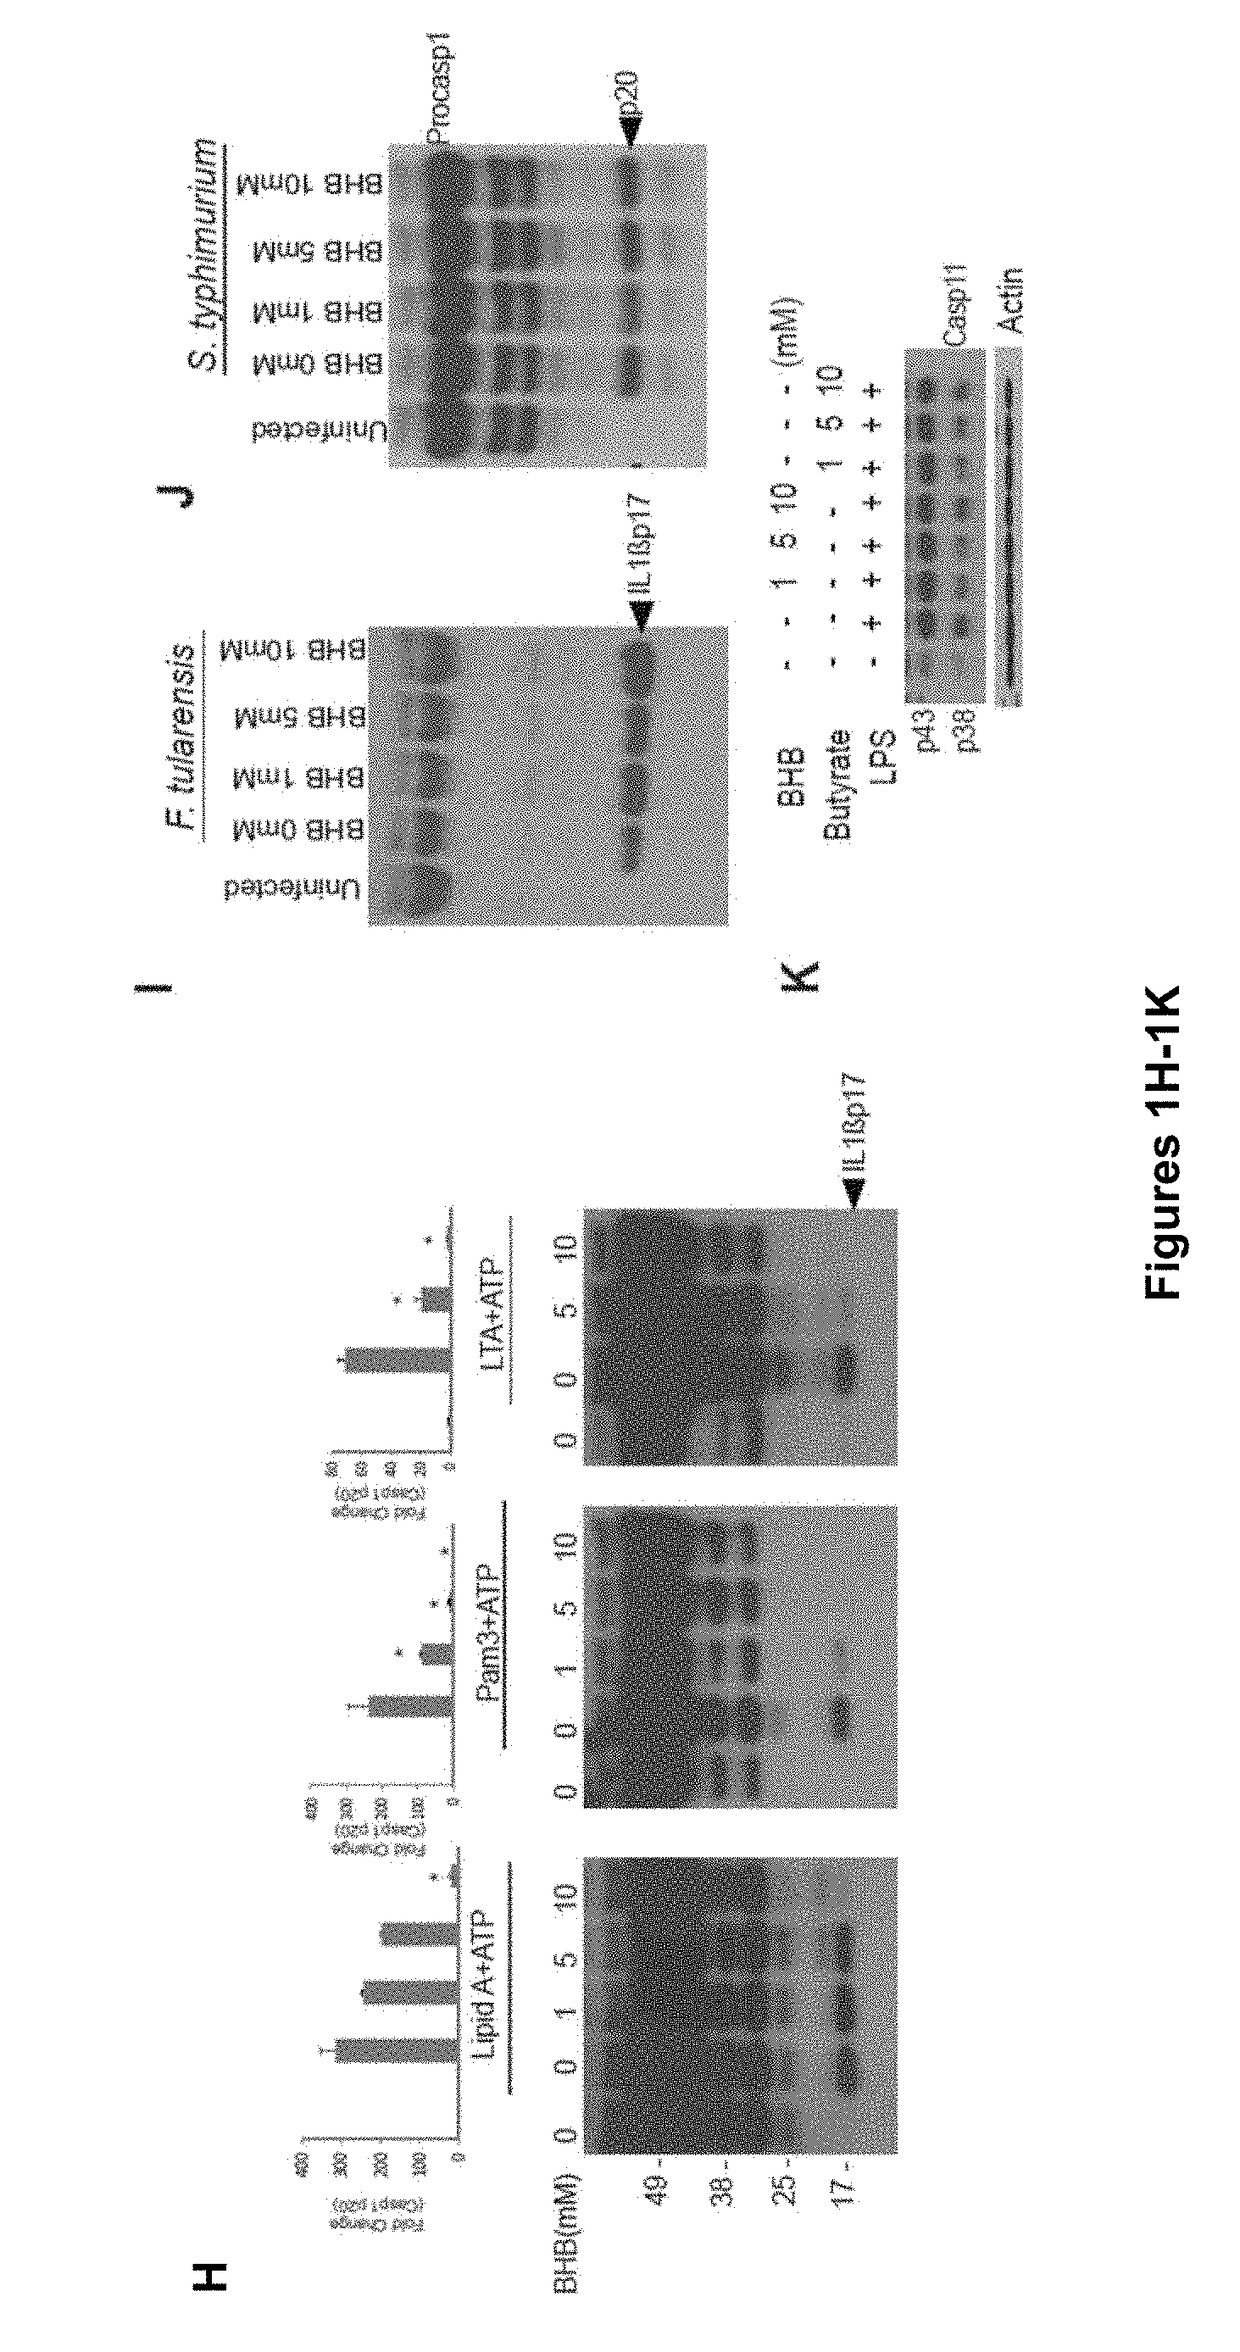 Compositions and Methods for Treating NLRP3 Inflammasome-Related Diseases and Disorders